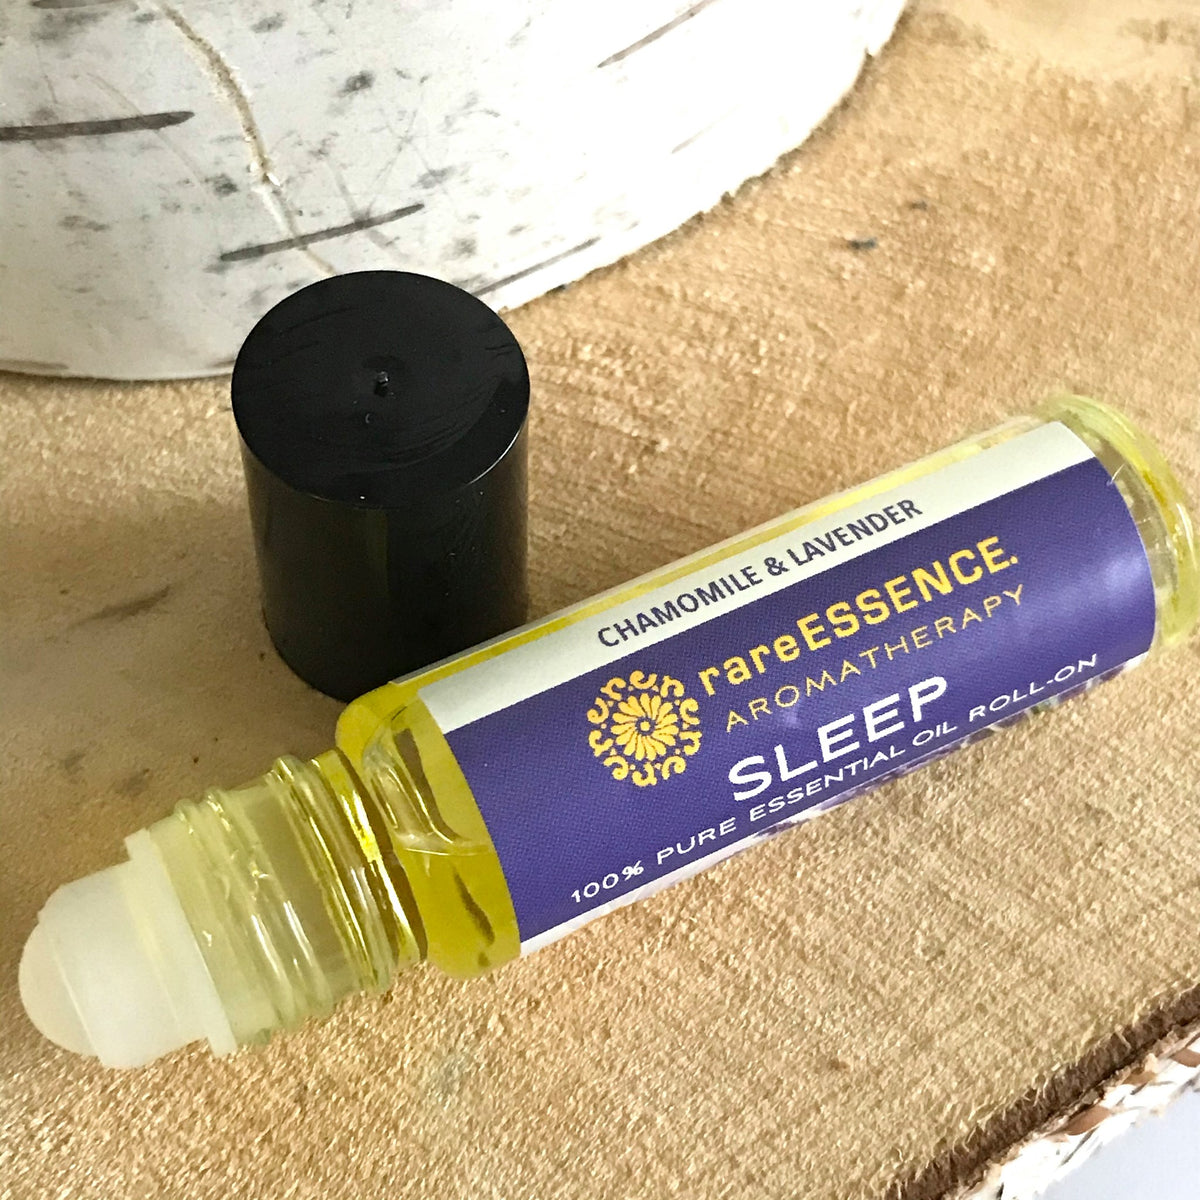 Sleep essential oil roll on contains oils like chamomile, sage, vetiver, and lavender to help you drift off. TSA compliant so you can even get to sleep in a hotel!